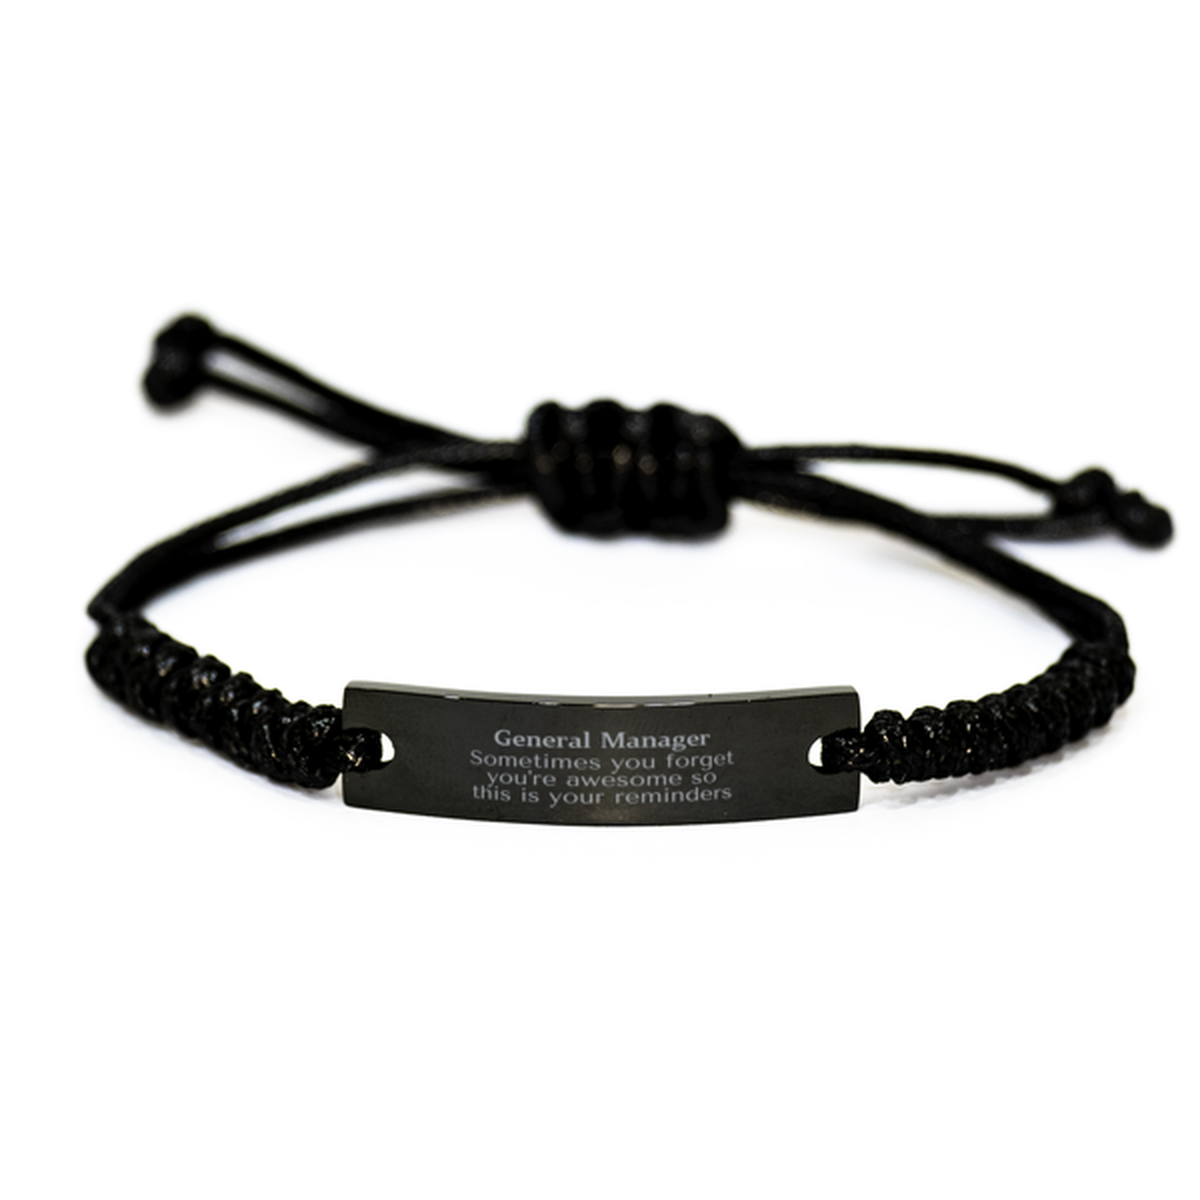 Sentimental General Manager Black Rope Bracelet, General Manager Sometimes you forget you're awesome so this is your reminders, Graduation Christmas Birthday Gifts for General Manager, Men, Women, Coworkers